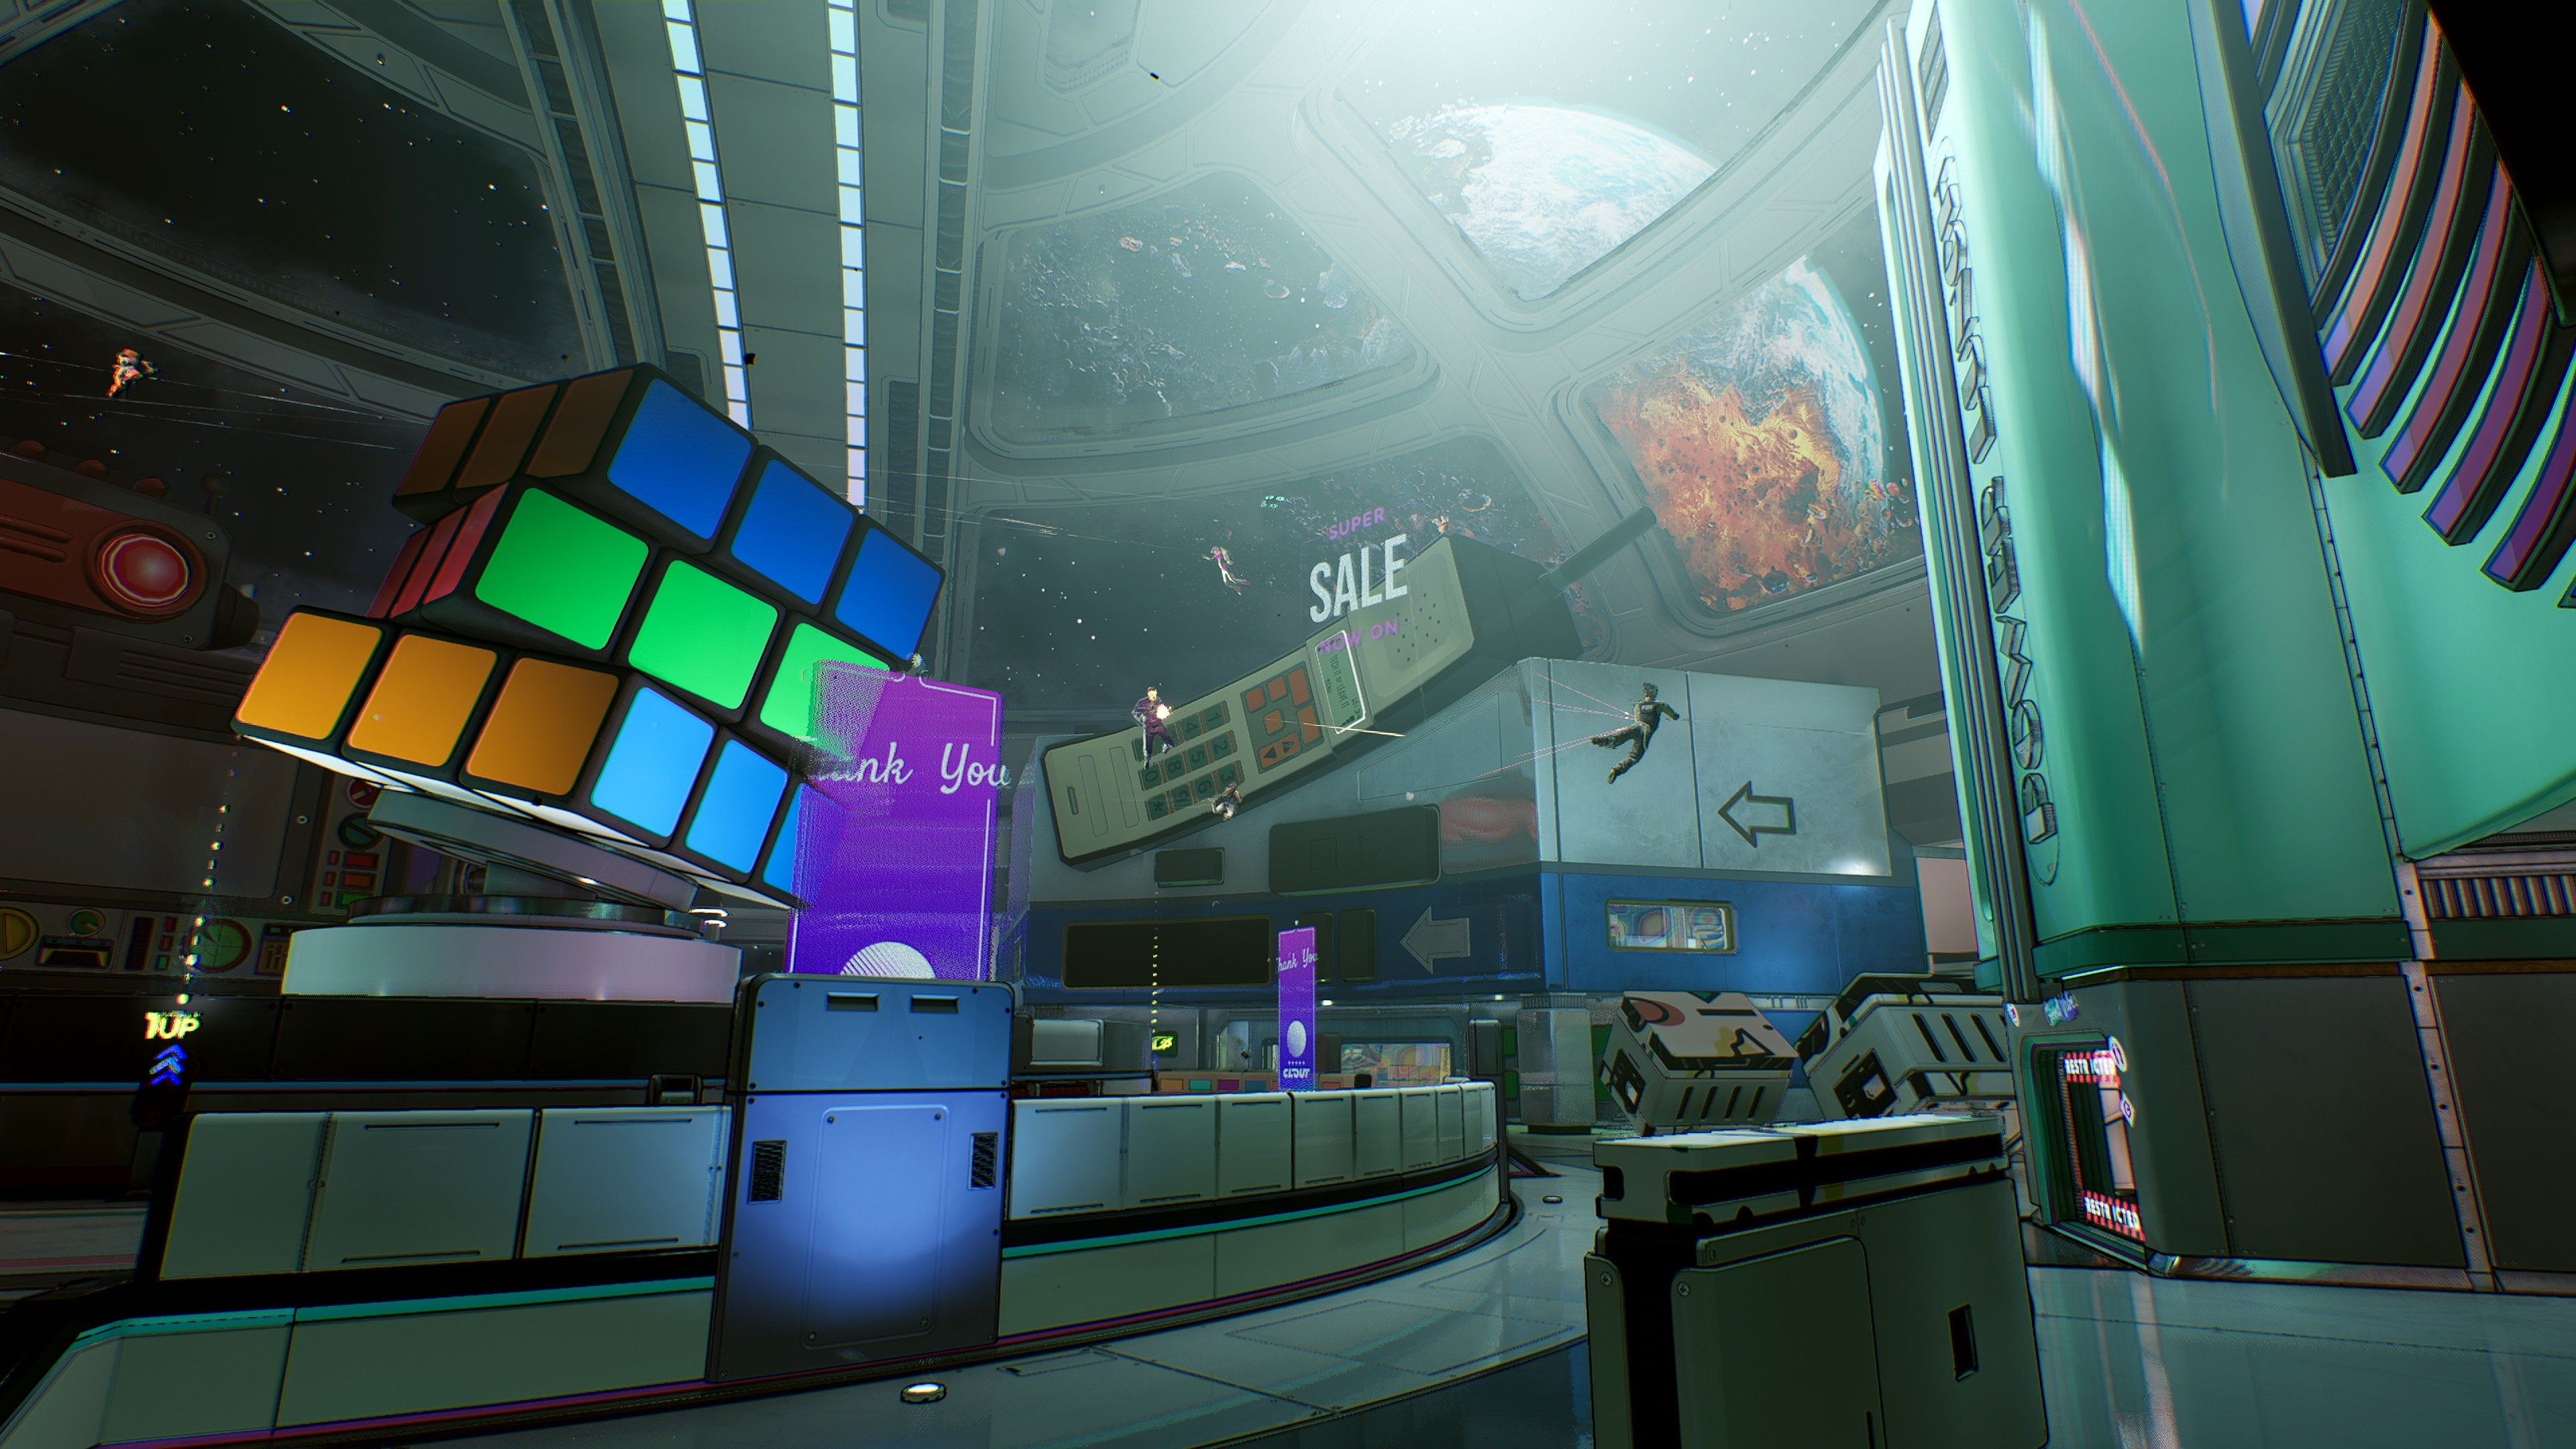 What looks like the atrium of a futuristic mall, only there are characters floating in the distance here, firing rockets at each other. There's planet visible outside the huge window, and there's a giant Rubik's cube in the foreground of the picture.